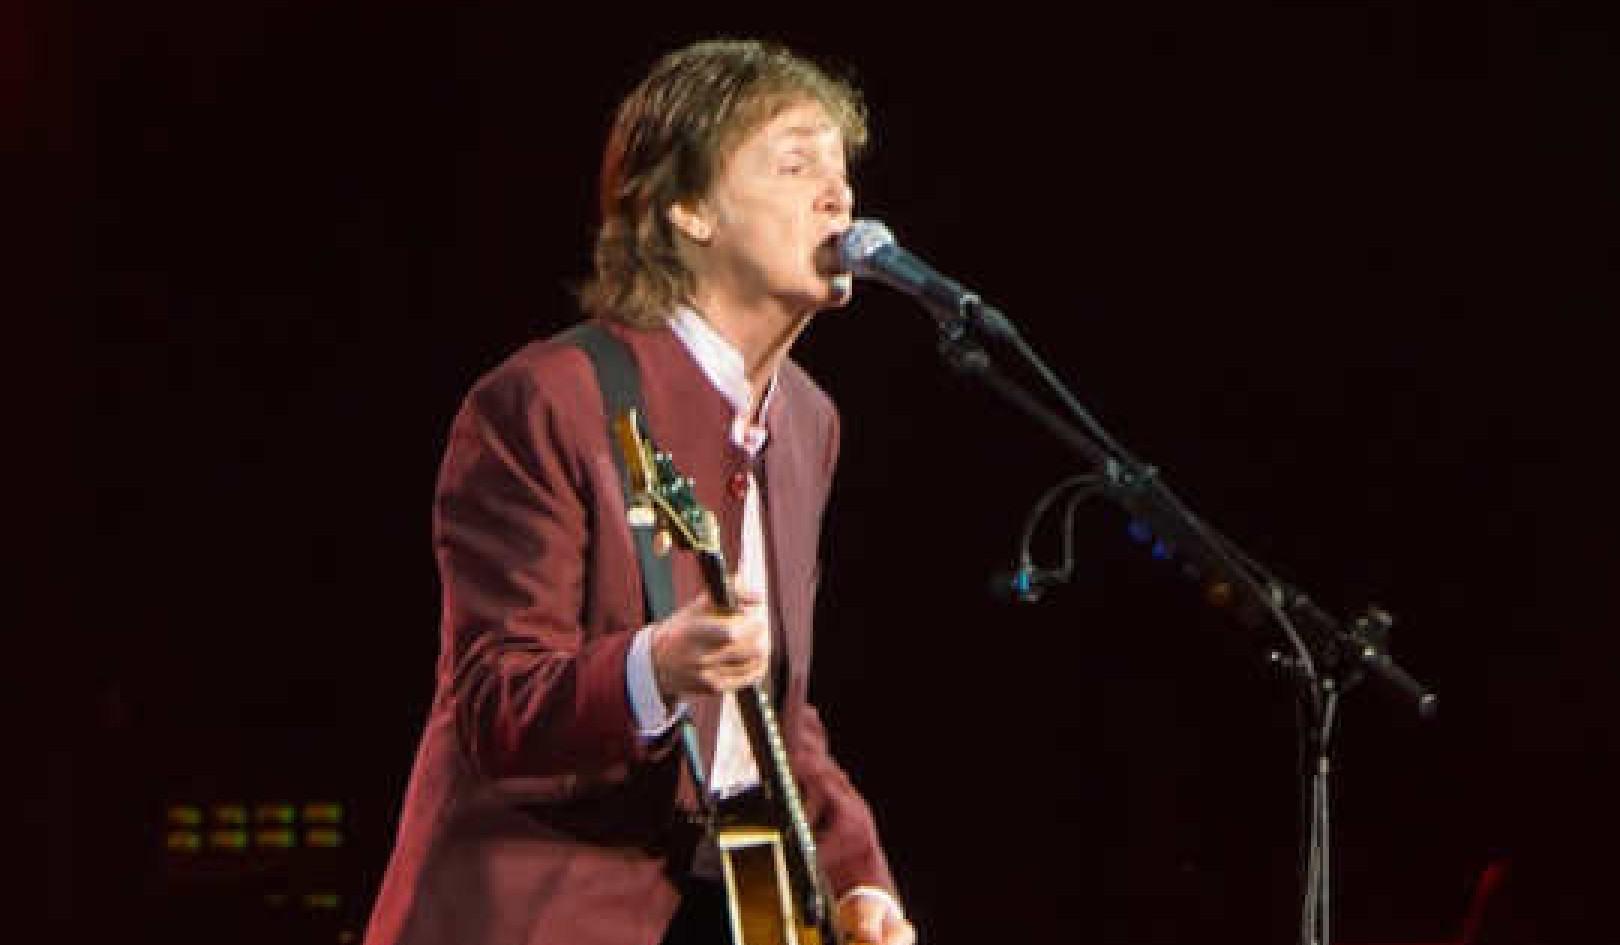 Let Paul McCartney Teach You About Harnessing Your Creativity